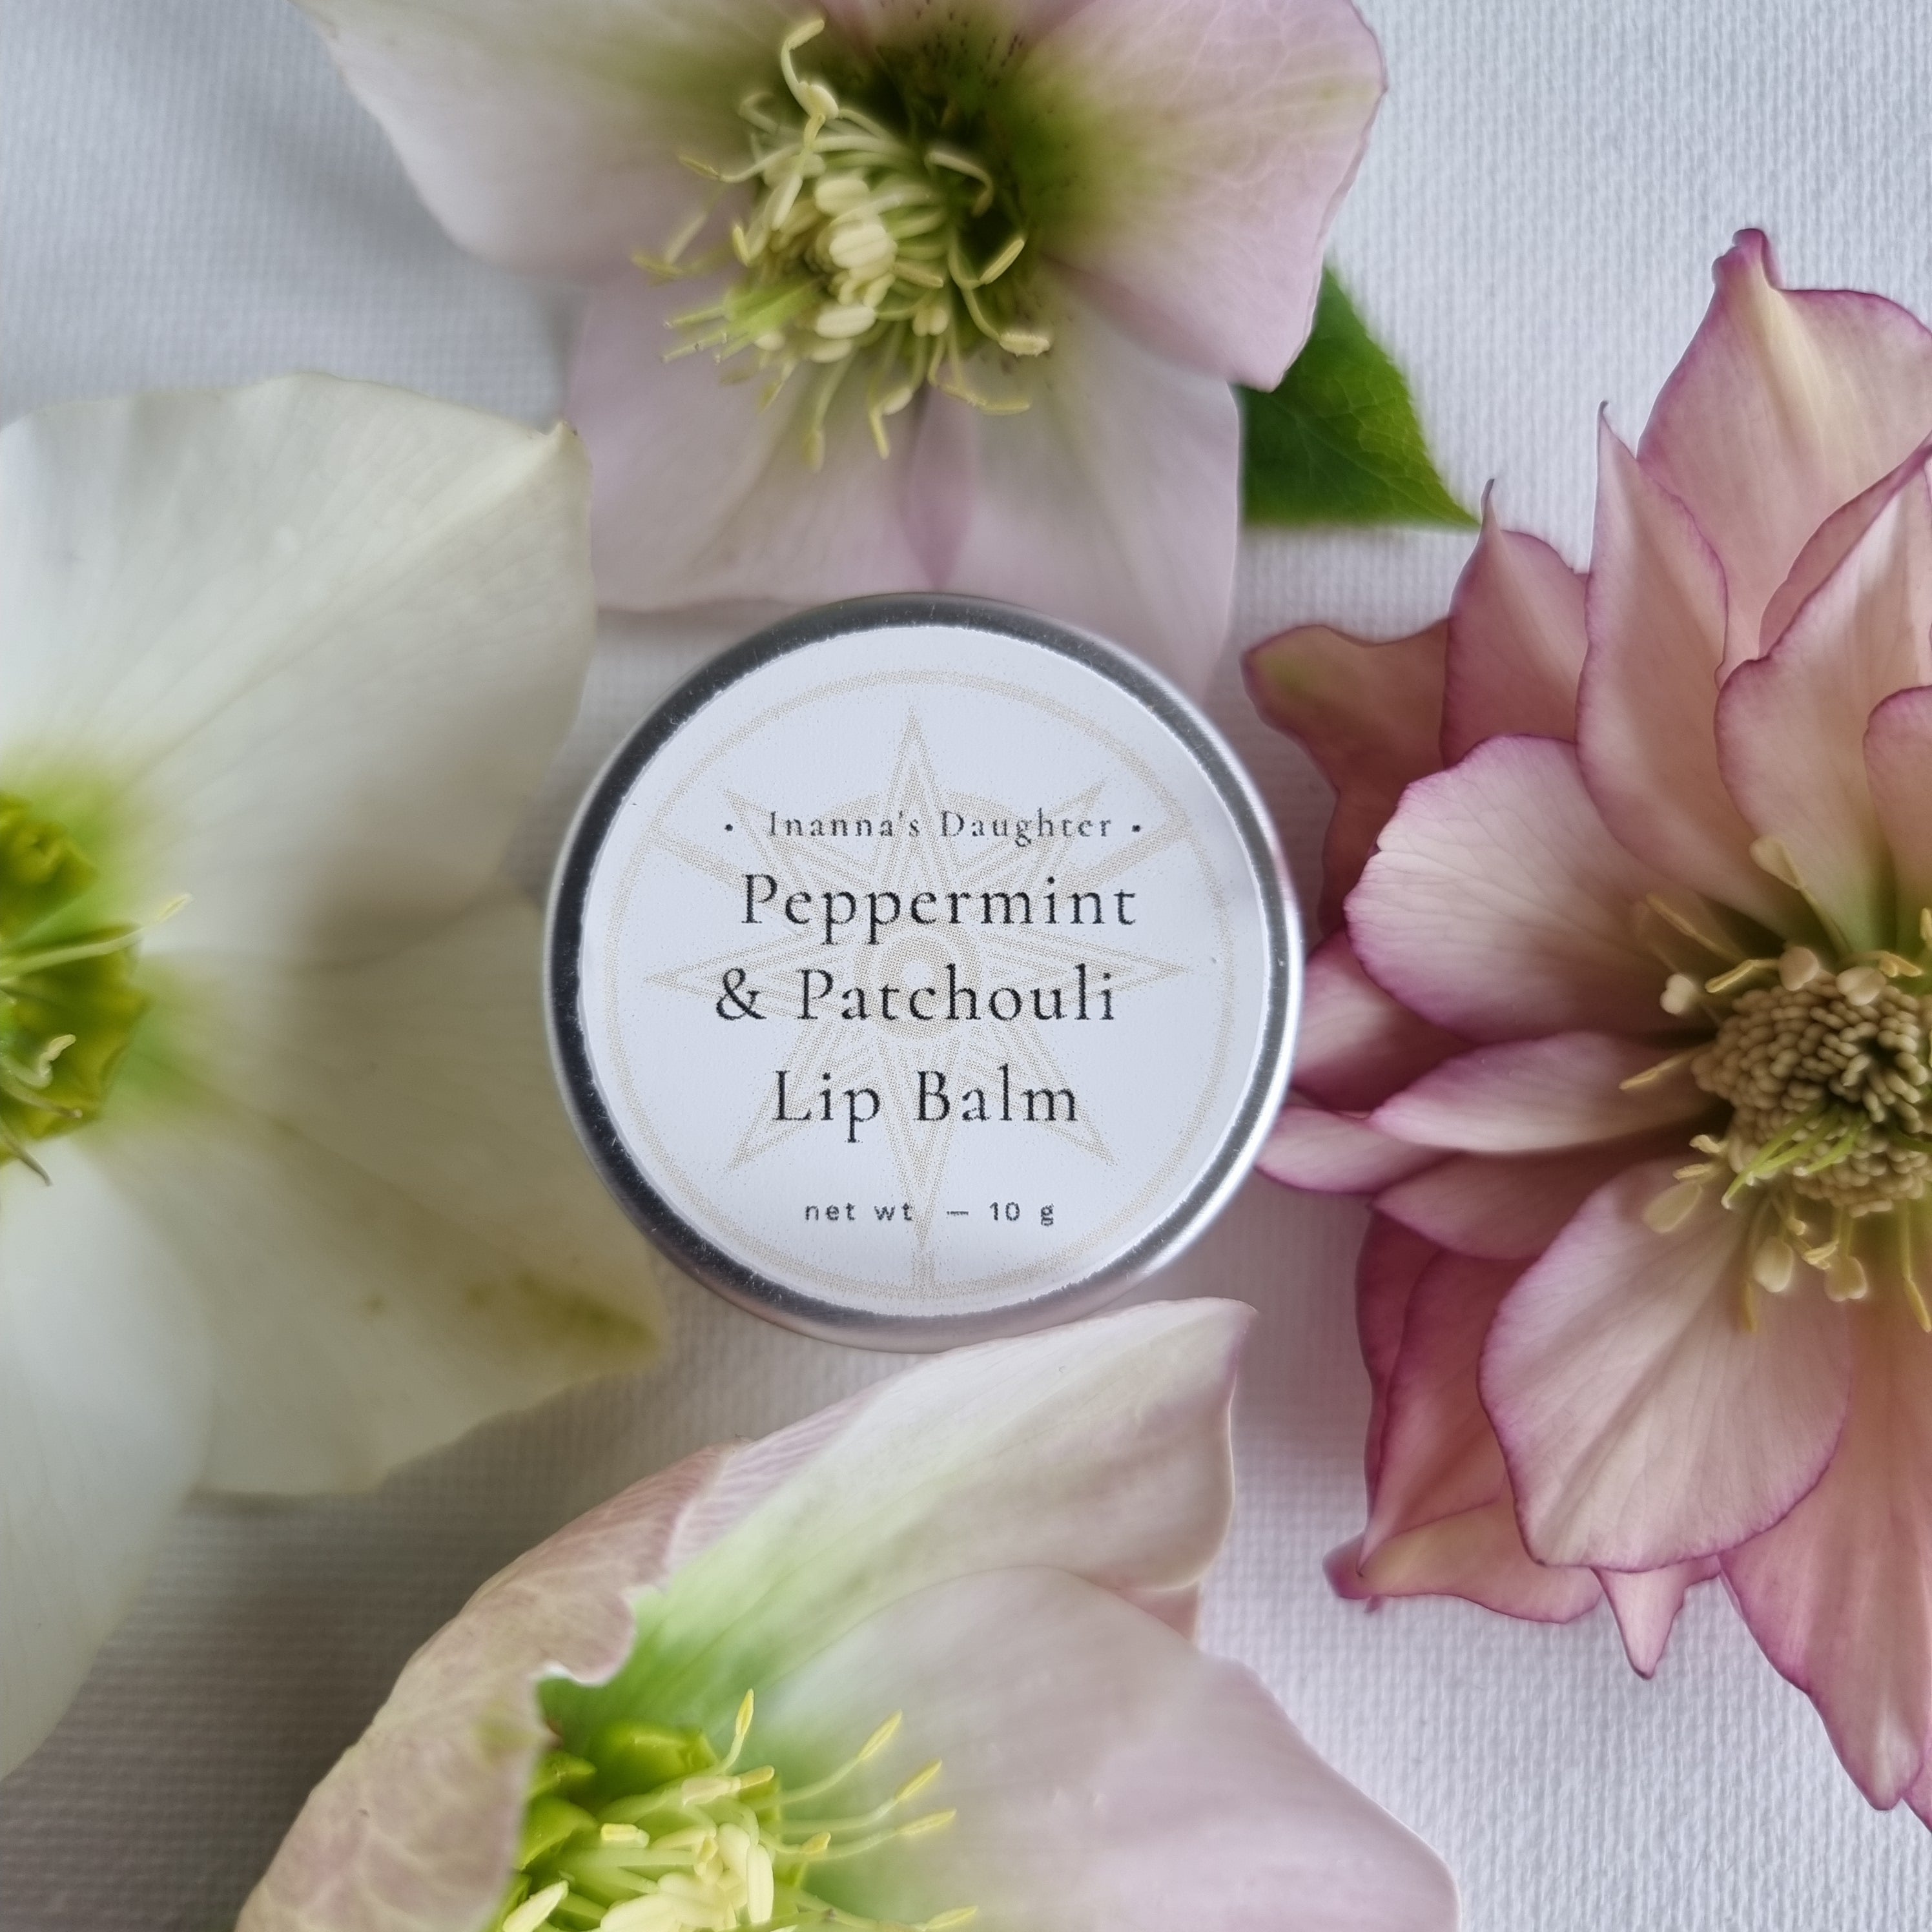 Peppermint & Patchouli Lip Balm freeshipping - Inanna's Daughter Shampoo & Conditioner Bars